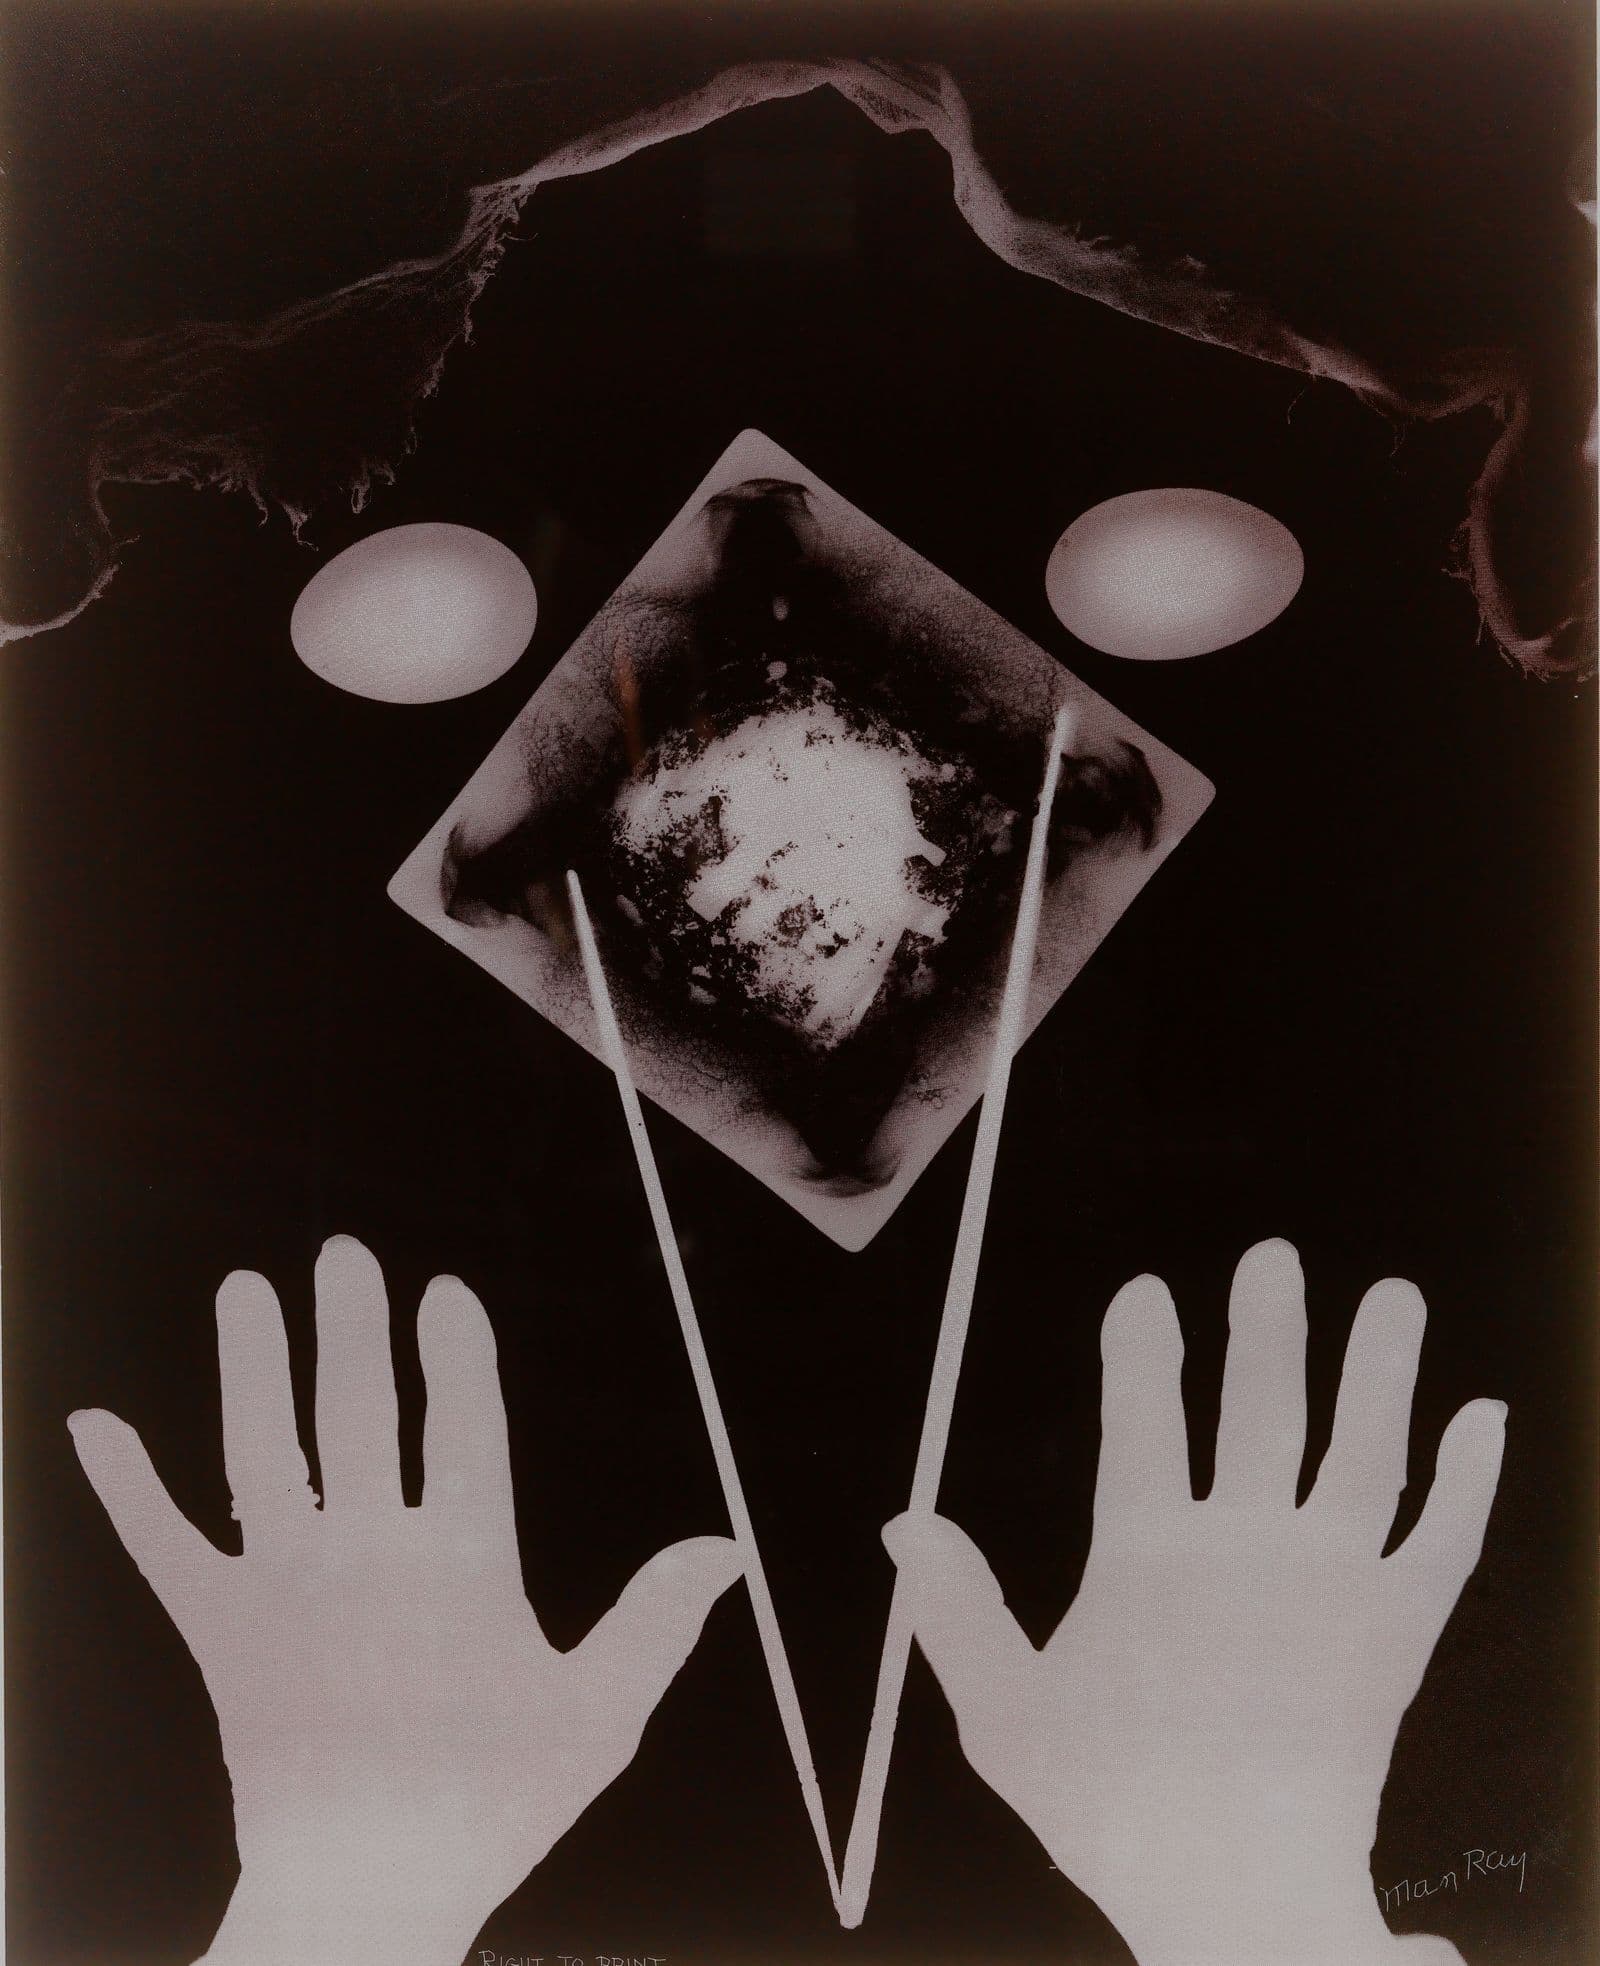 A photogram translated into a screenprint depicting two ghostly hands, alongside other ambiguous outlines, such as eggs, an ashtray and lace material.